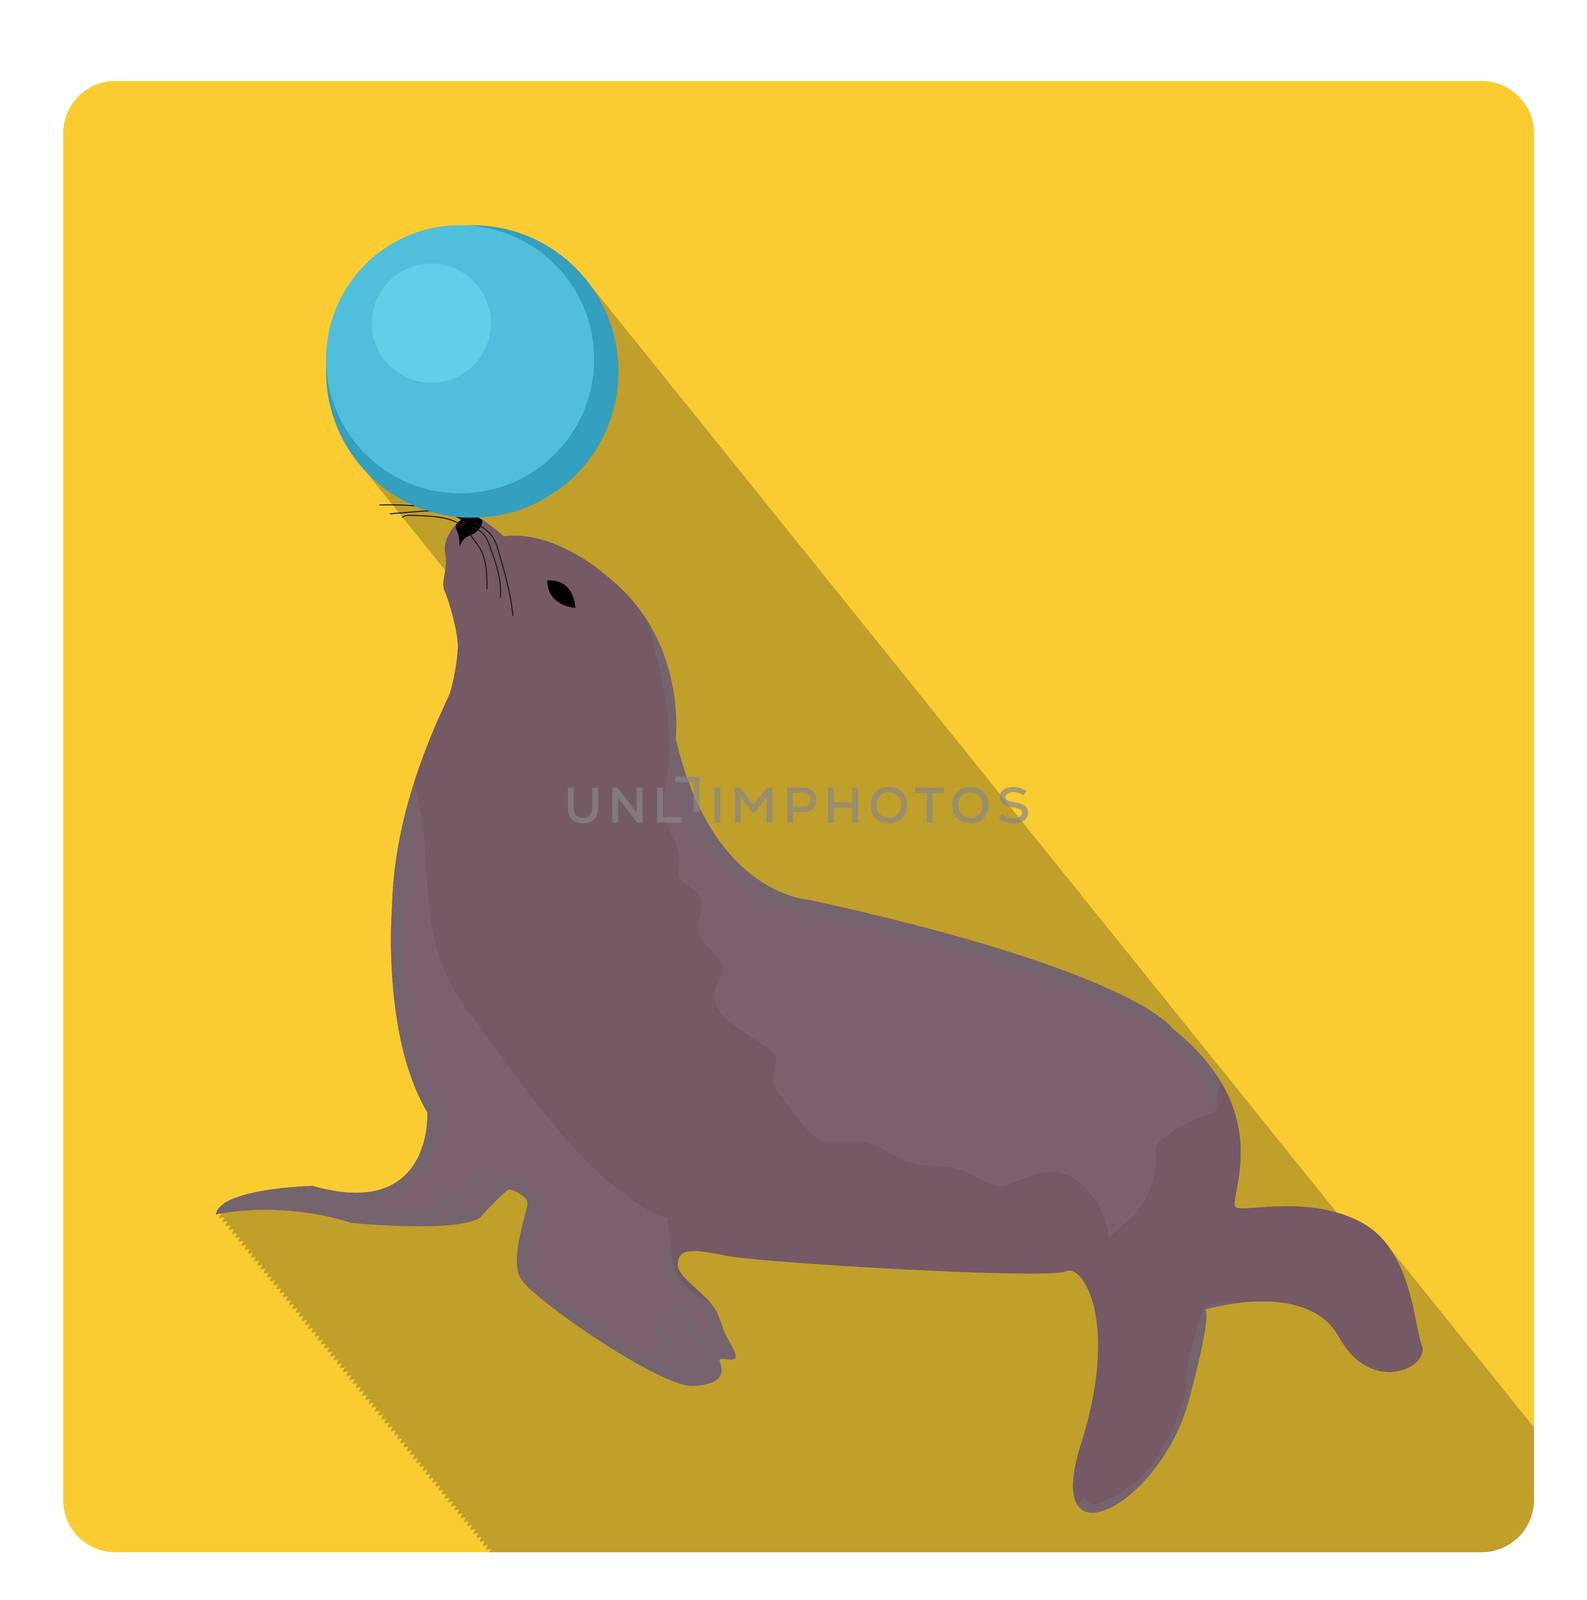 Sea lion with a ball, circus icon flat style with long shadows, isolated on white background. illustration